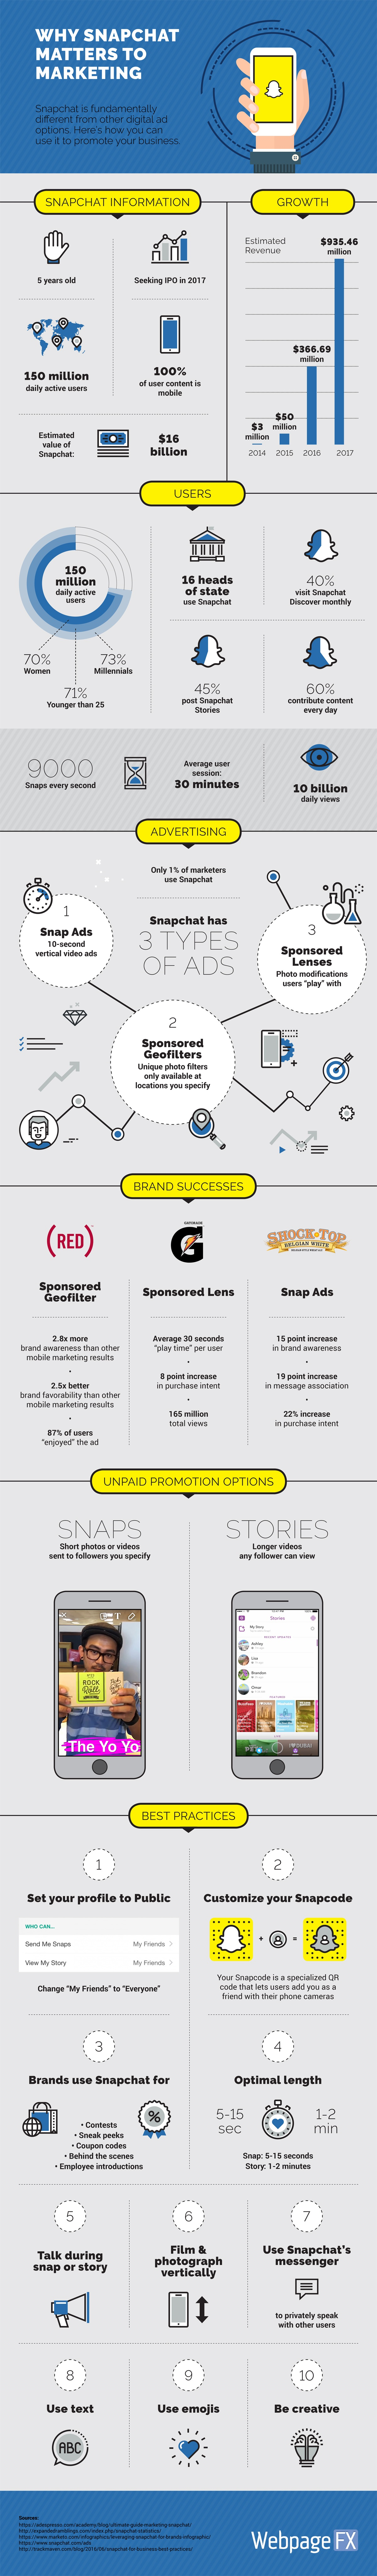 Why Snapchat Matters to Marketing #infographic